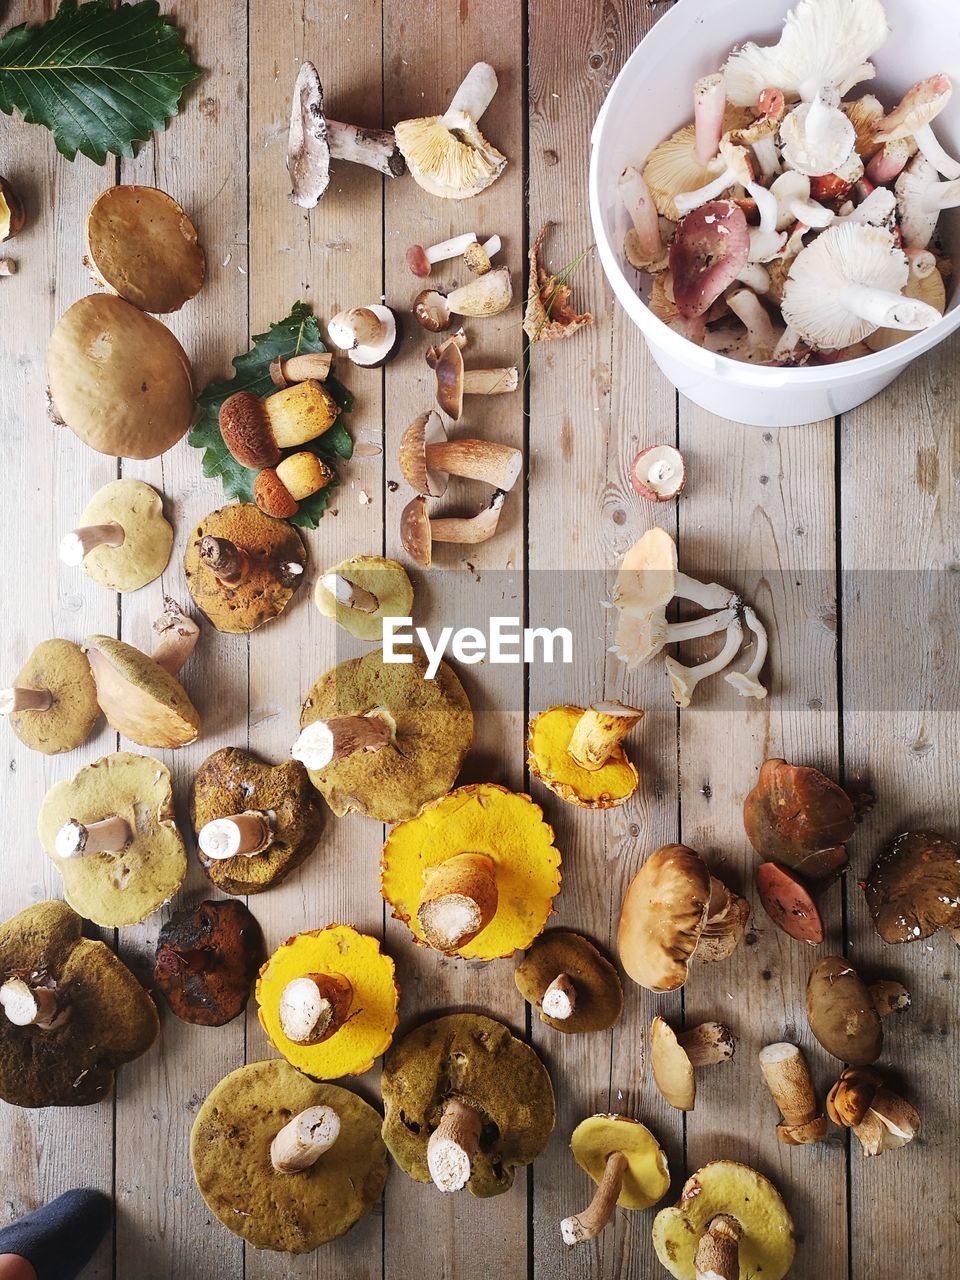 food, food and drink, mushroom, wood, healthy eating, freshness, high angle view, produce, variation, fruit, wellbeing, indoors, no people, large group of objects, nut, nut - food, abundance, vegetable, table, still life, directly above, edible mushroom, spice, celebration, studio shot, christmas